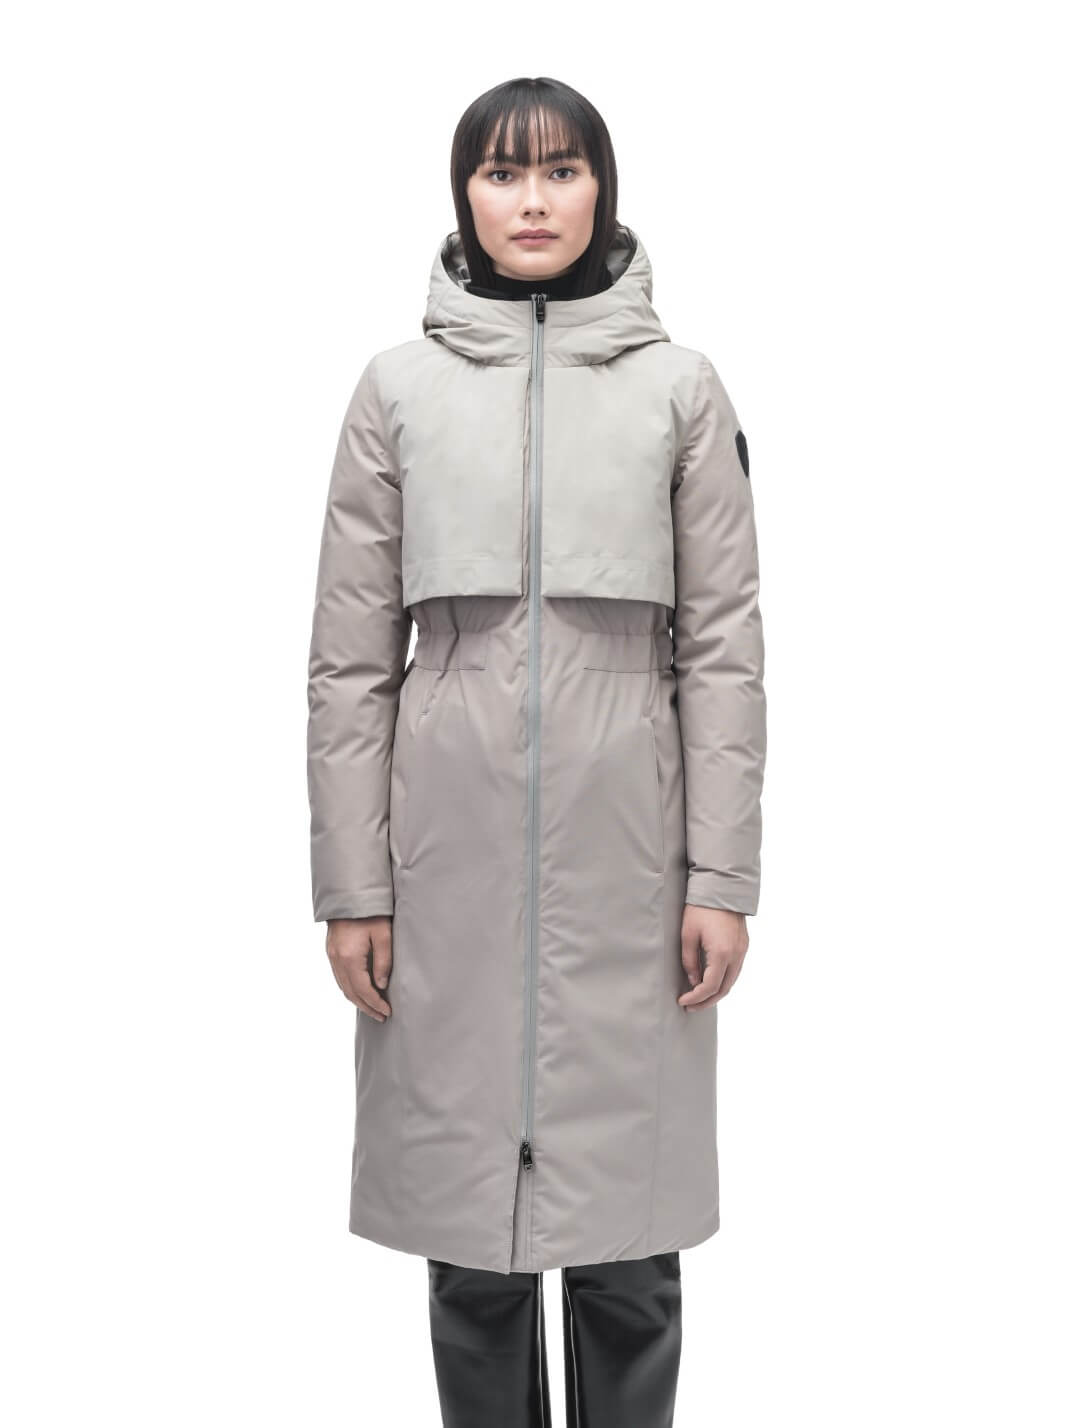 Iris Ladies Long Parka in below the knee length, Canadian duck down insulation, non-removable hood, and two-way zipper, in Clay